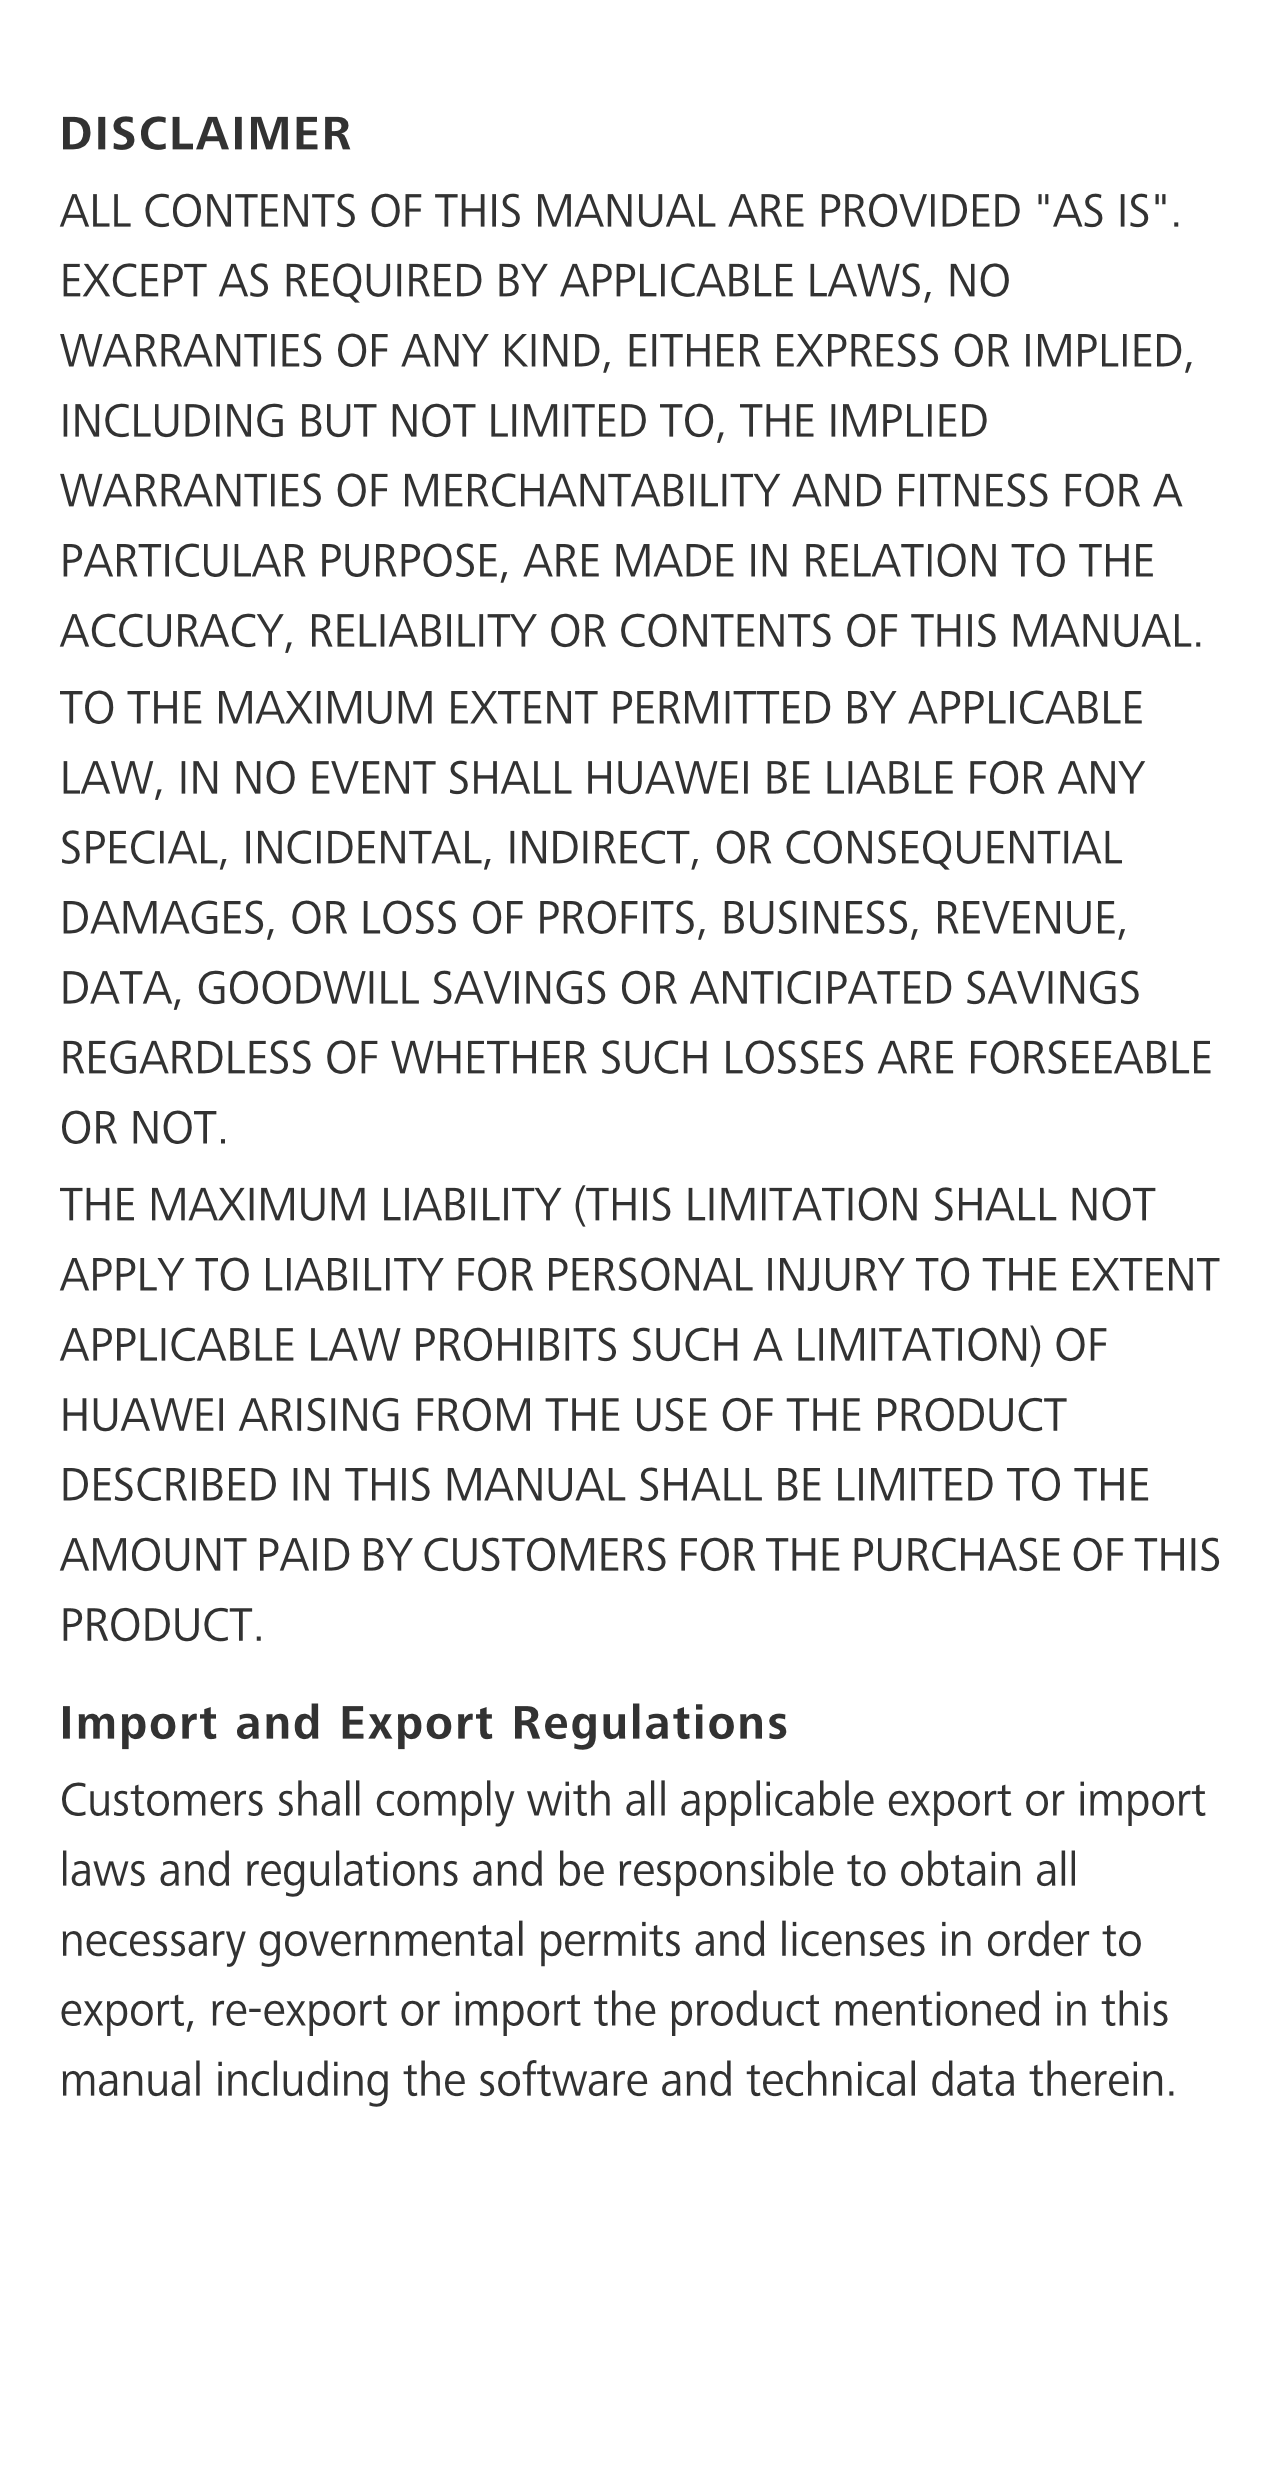 DISCLAIMER
ALL CONTENTS OF THIS MANUAL ARE PROVIDED "AS IS". 
EXCEPT AS REQUIRED BY APPLICABLE LAWS, NO 
WARRANTIES OF ANY KIND,